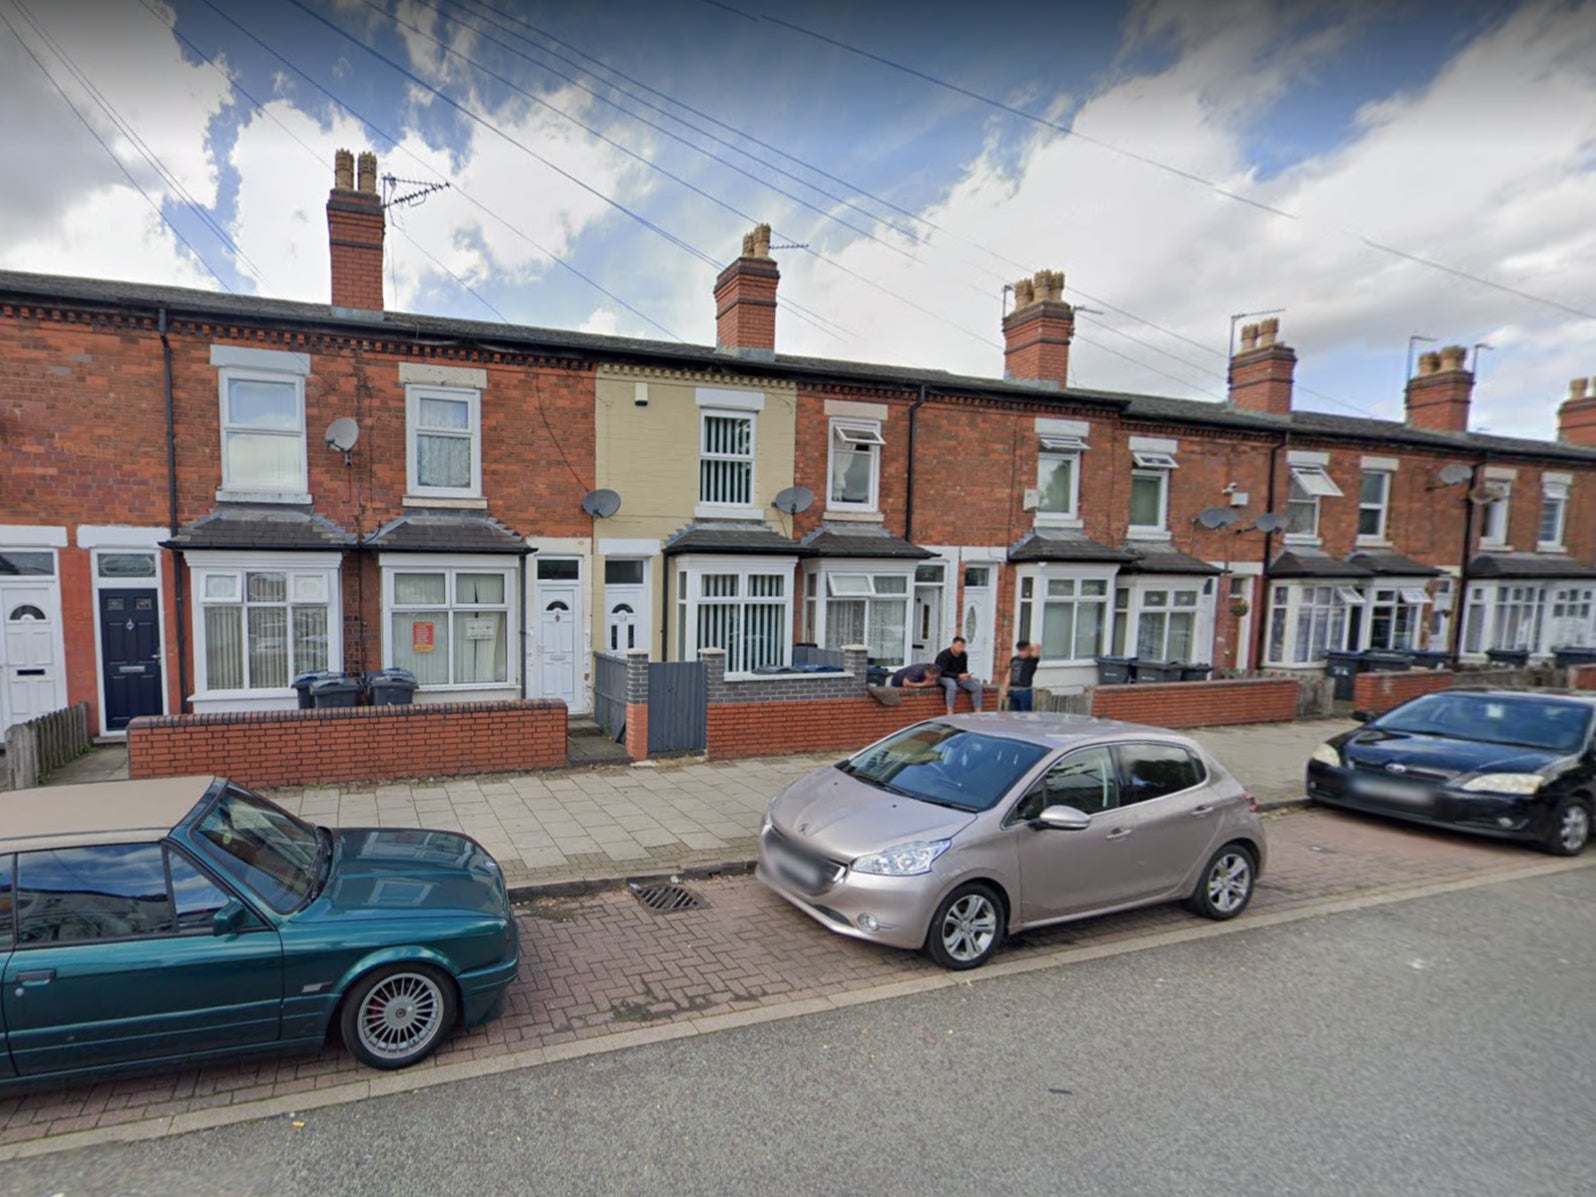 The man was found inside a car with serious injuries on Wright Road, Saltley, Birmingham